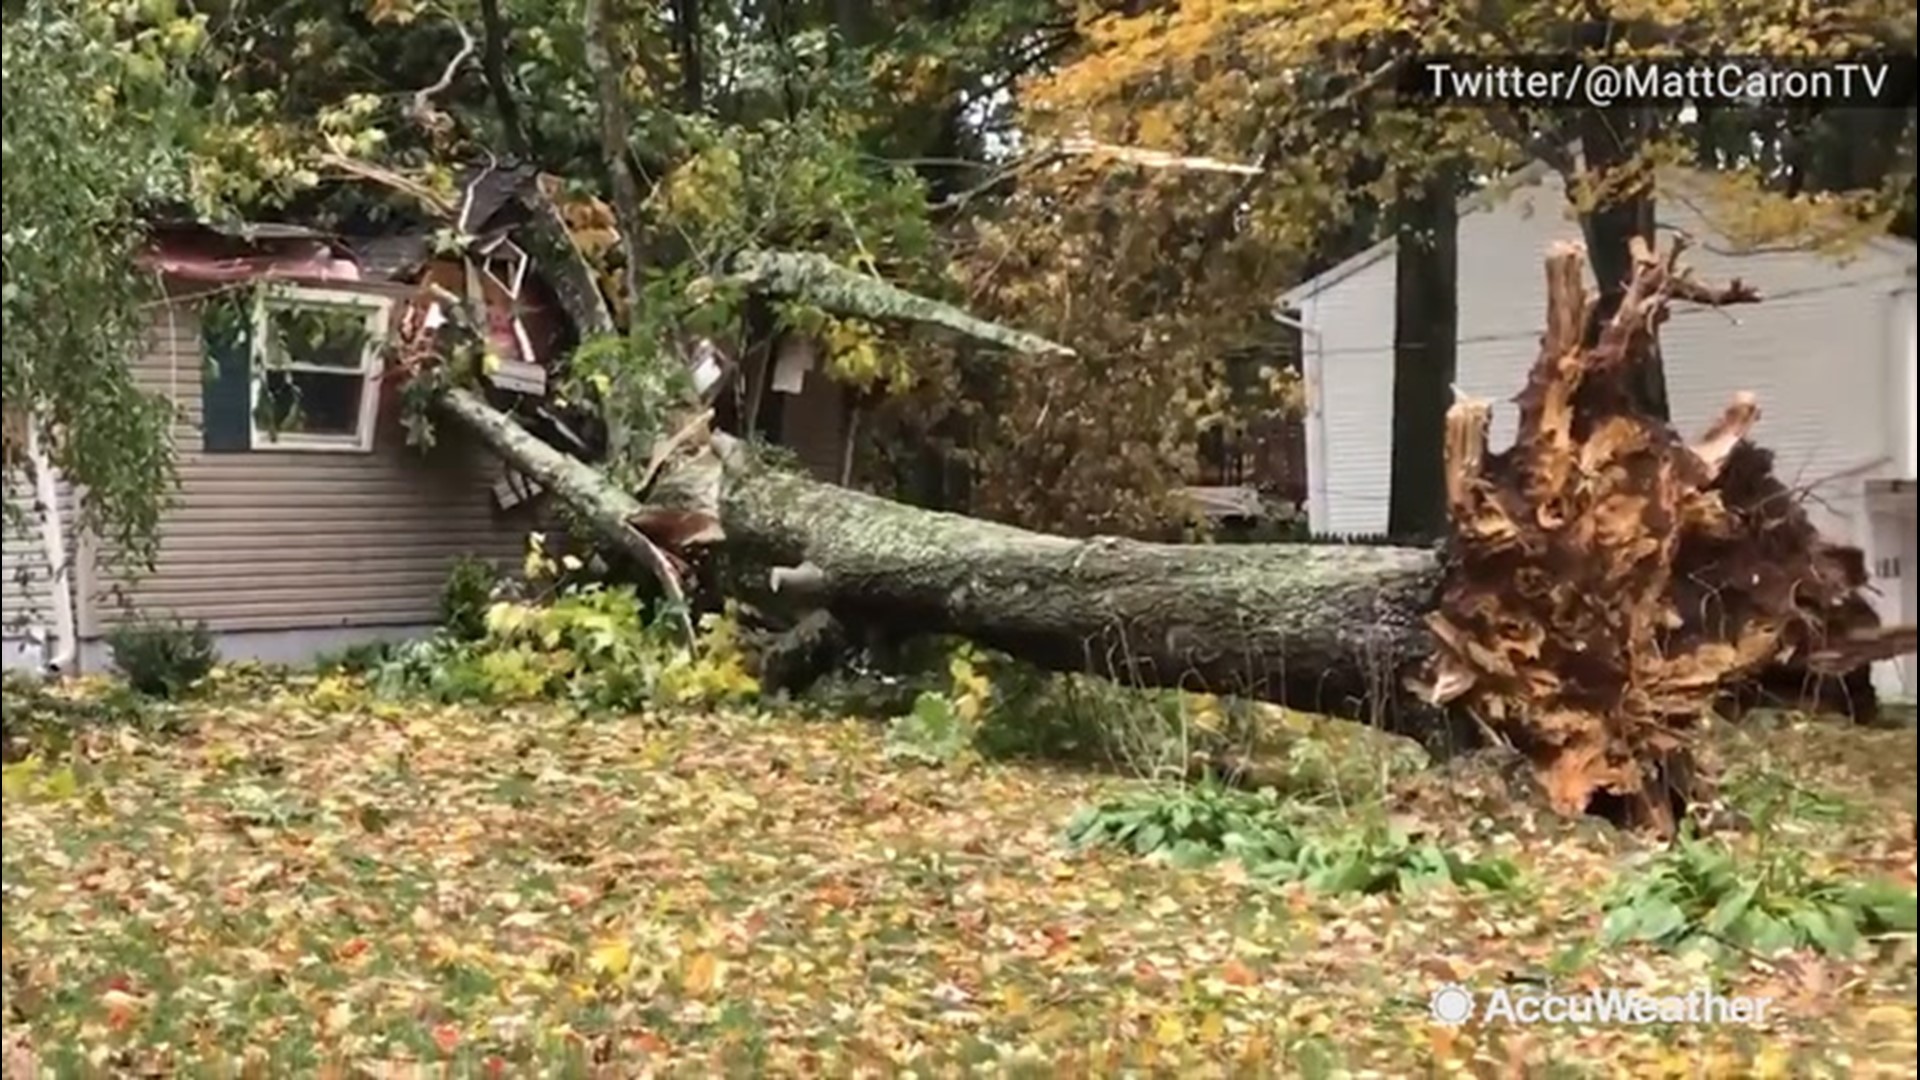 This tree was ripped from the roots and toppled over a house on Oct. 17. Fortunately, the owner of the house was not home.